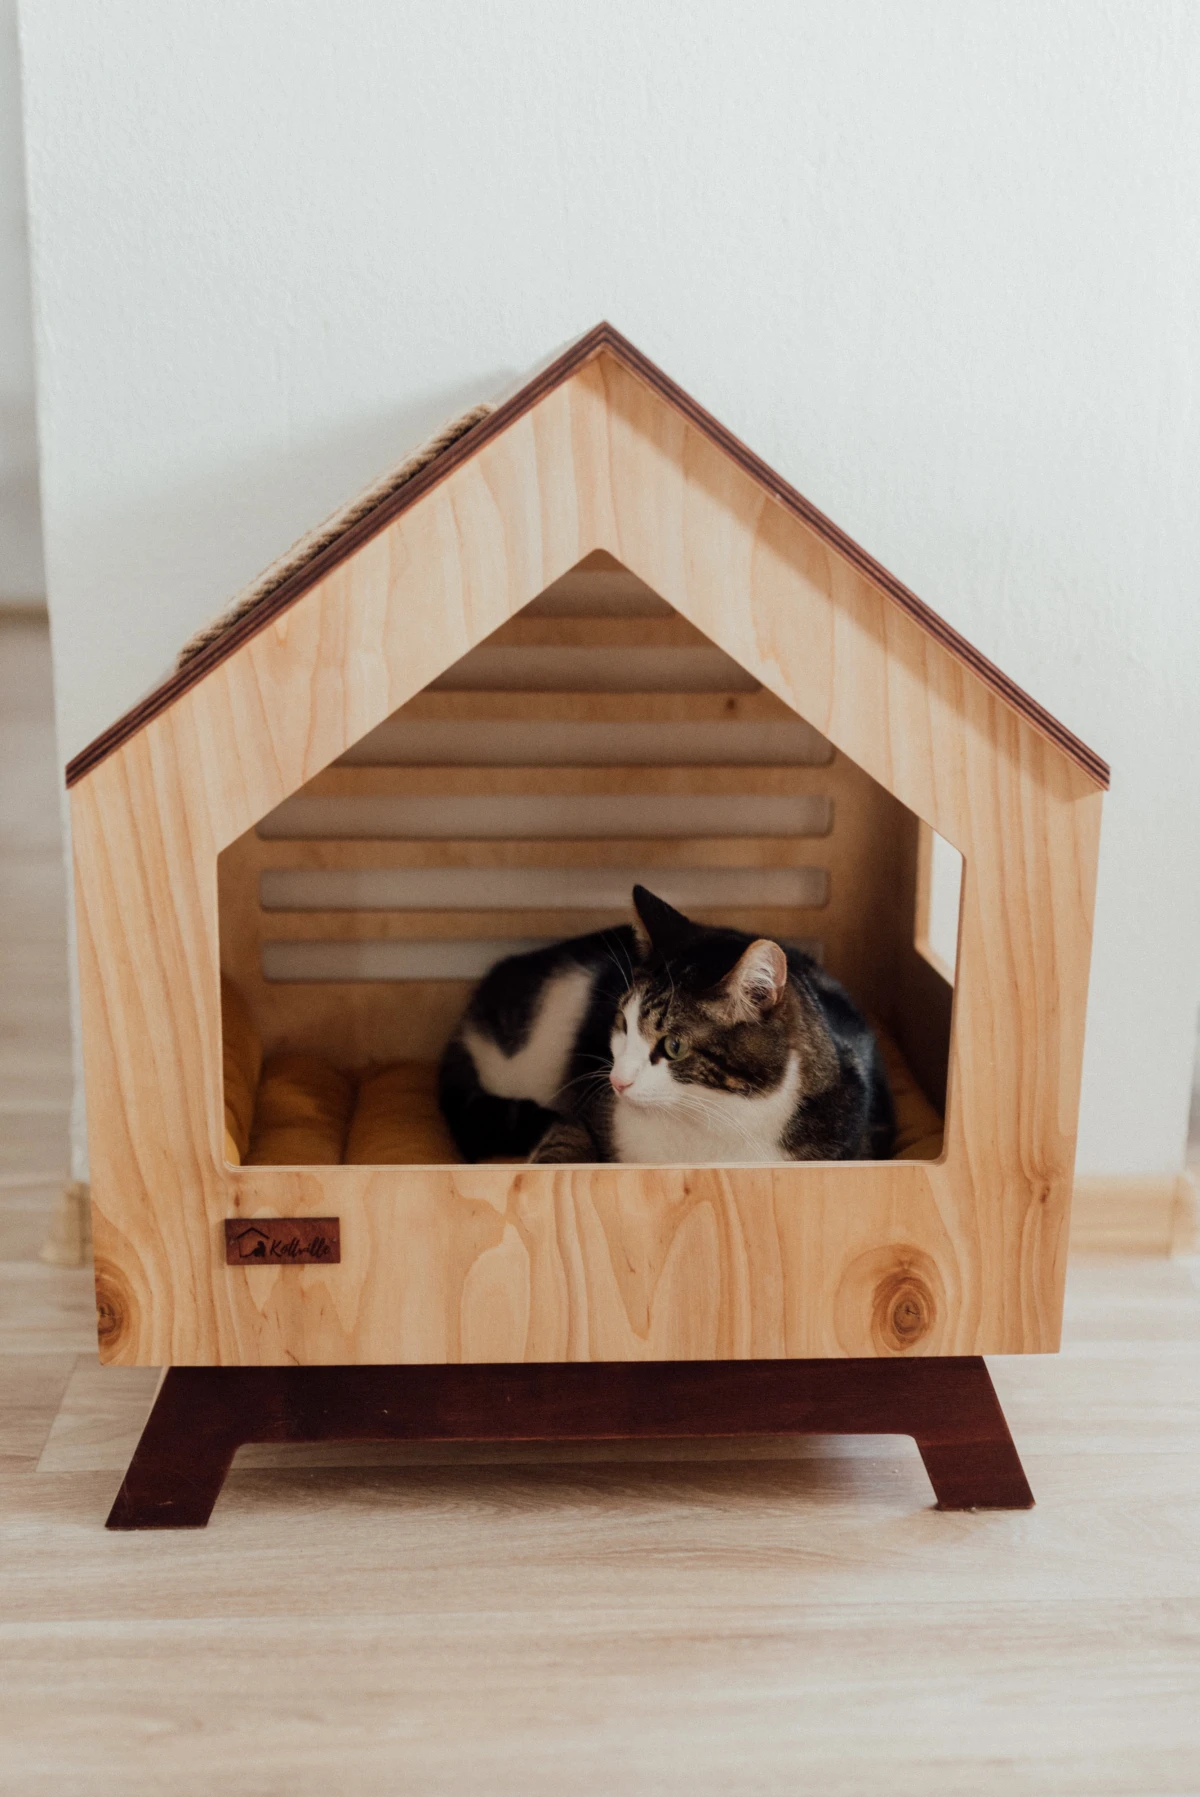 cat sleeping in a wooden cat house